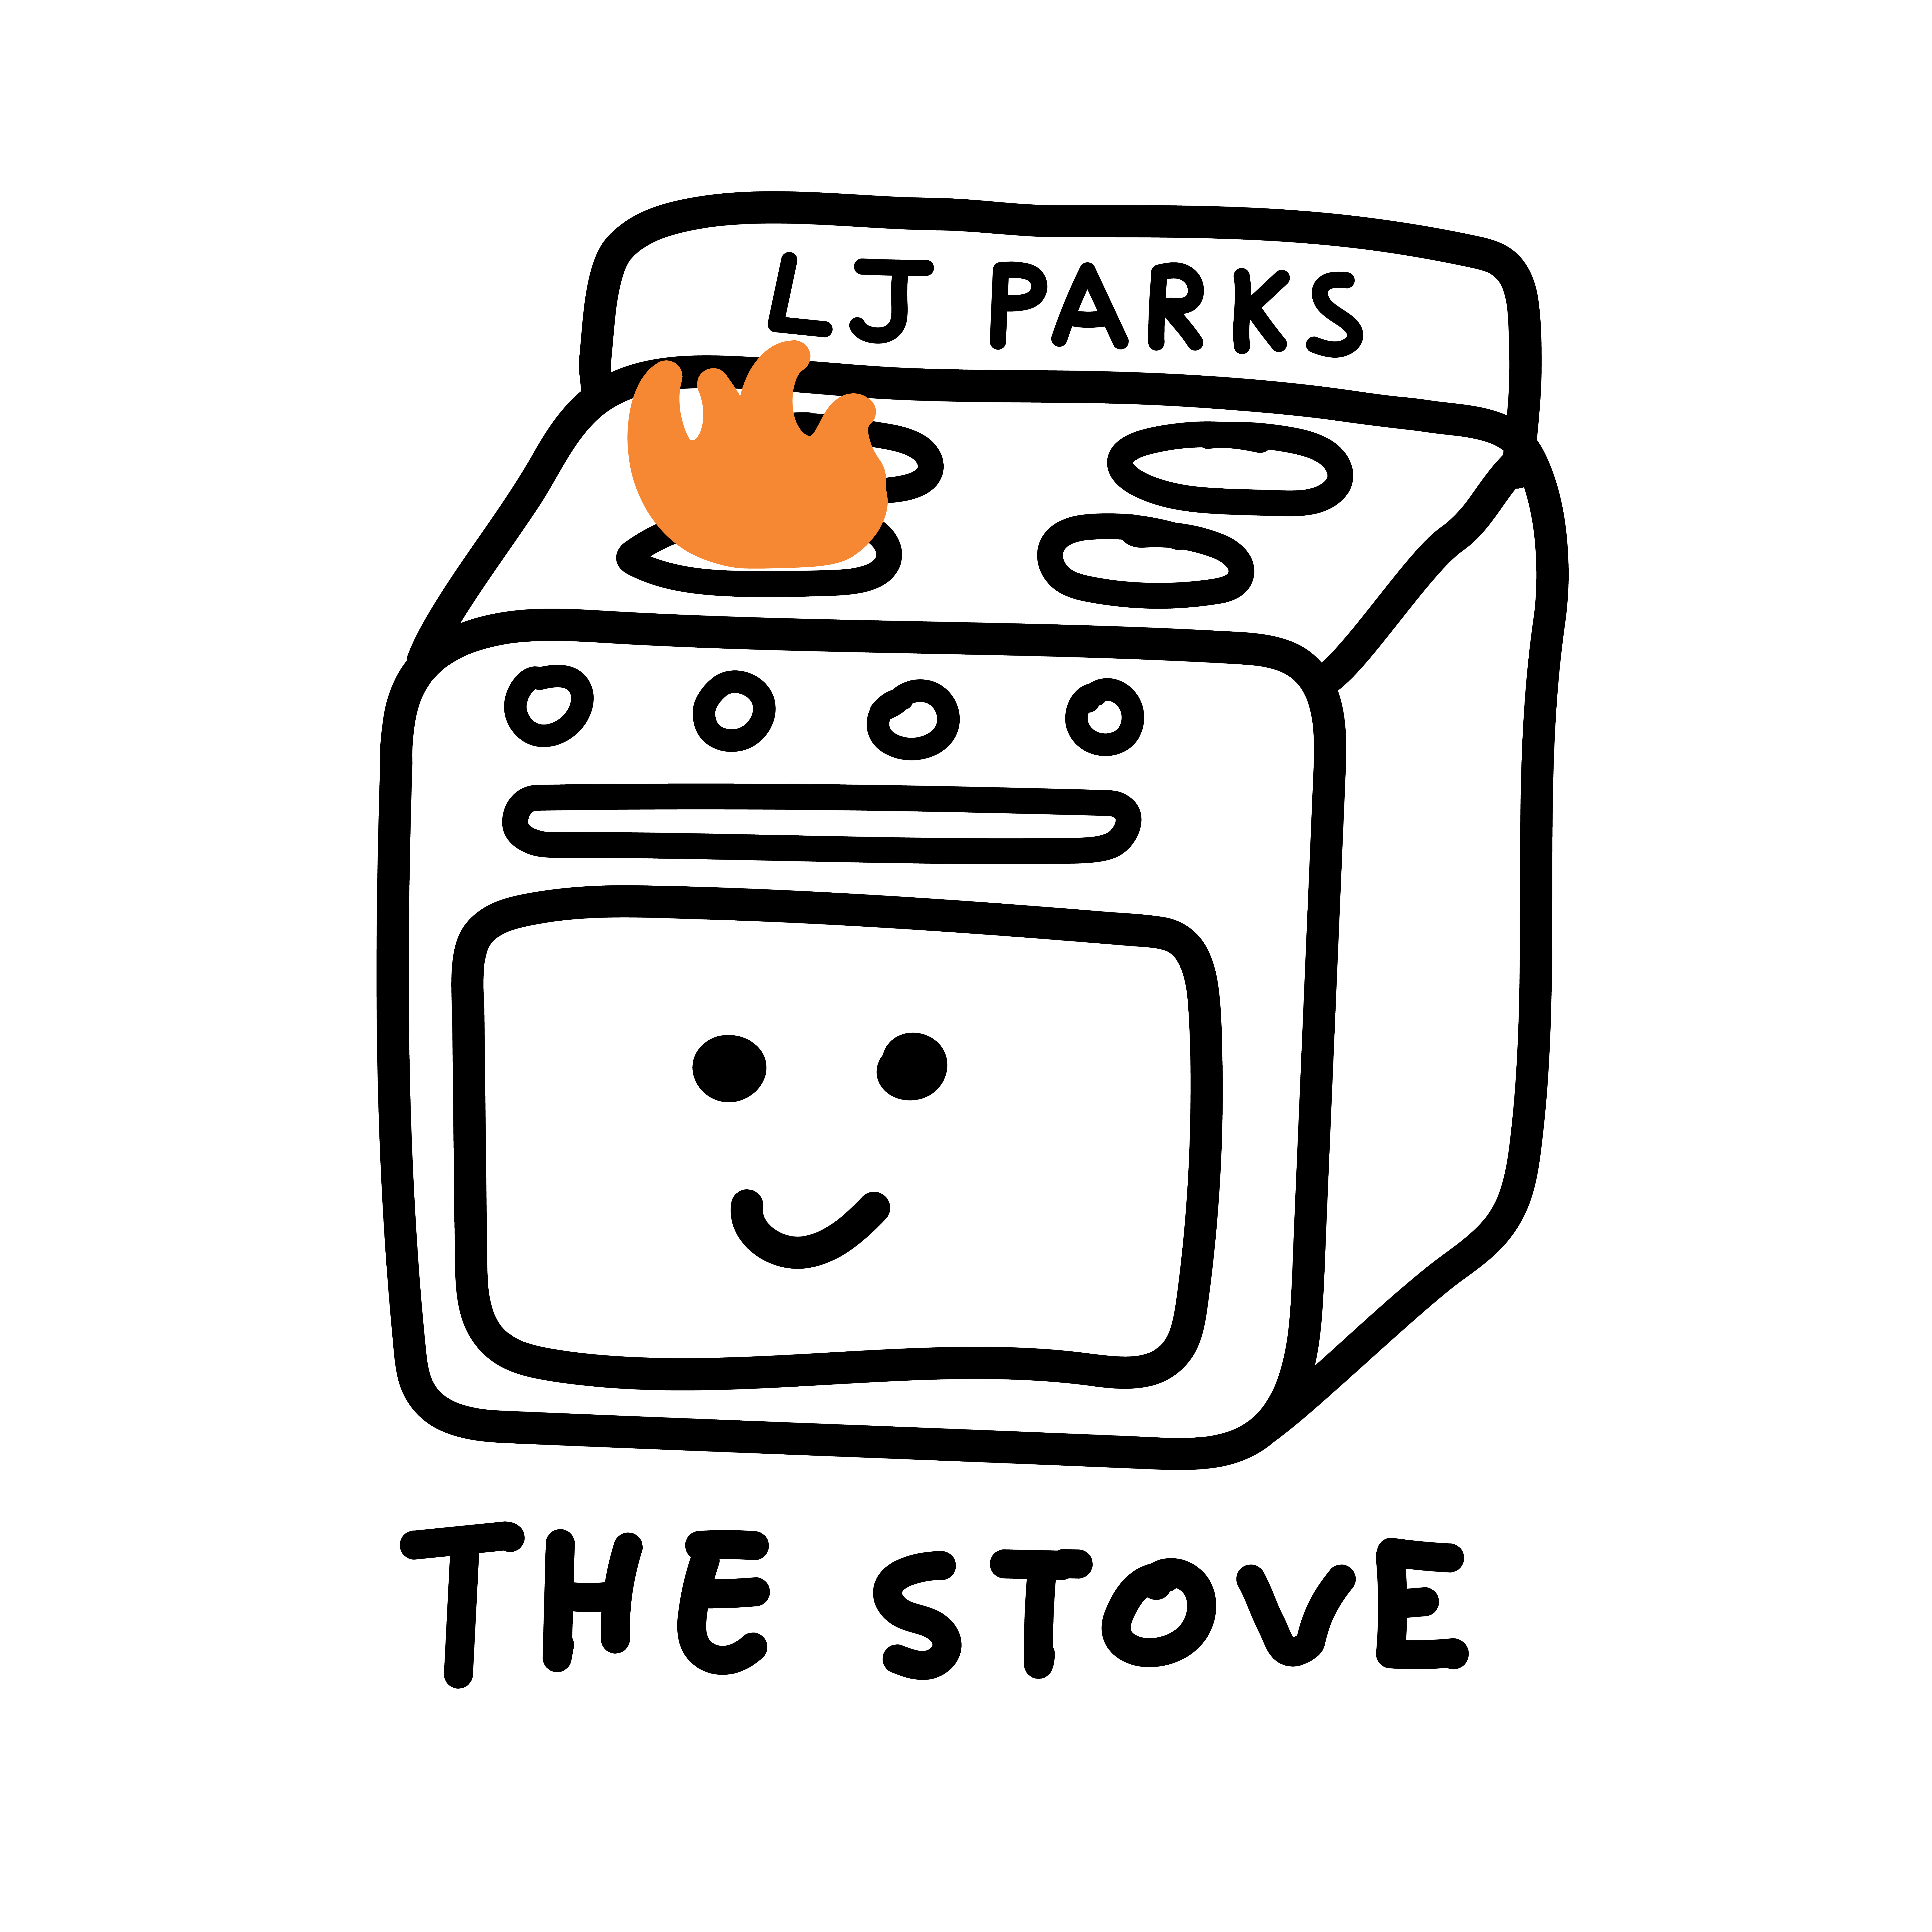 Artwork for track: The Stove by LJ Parks